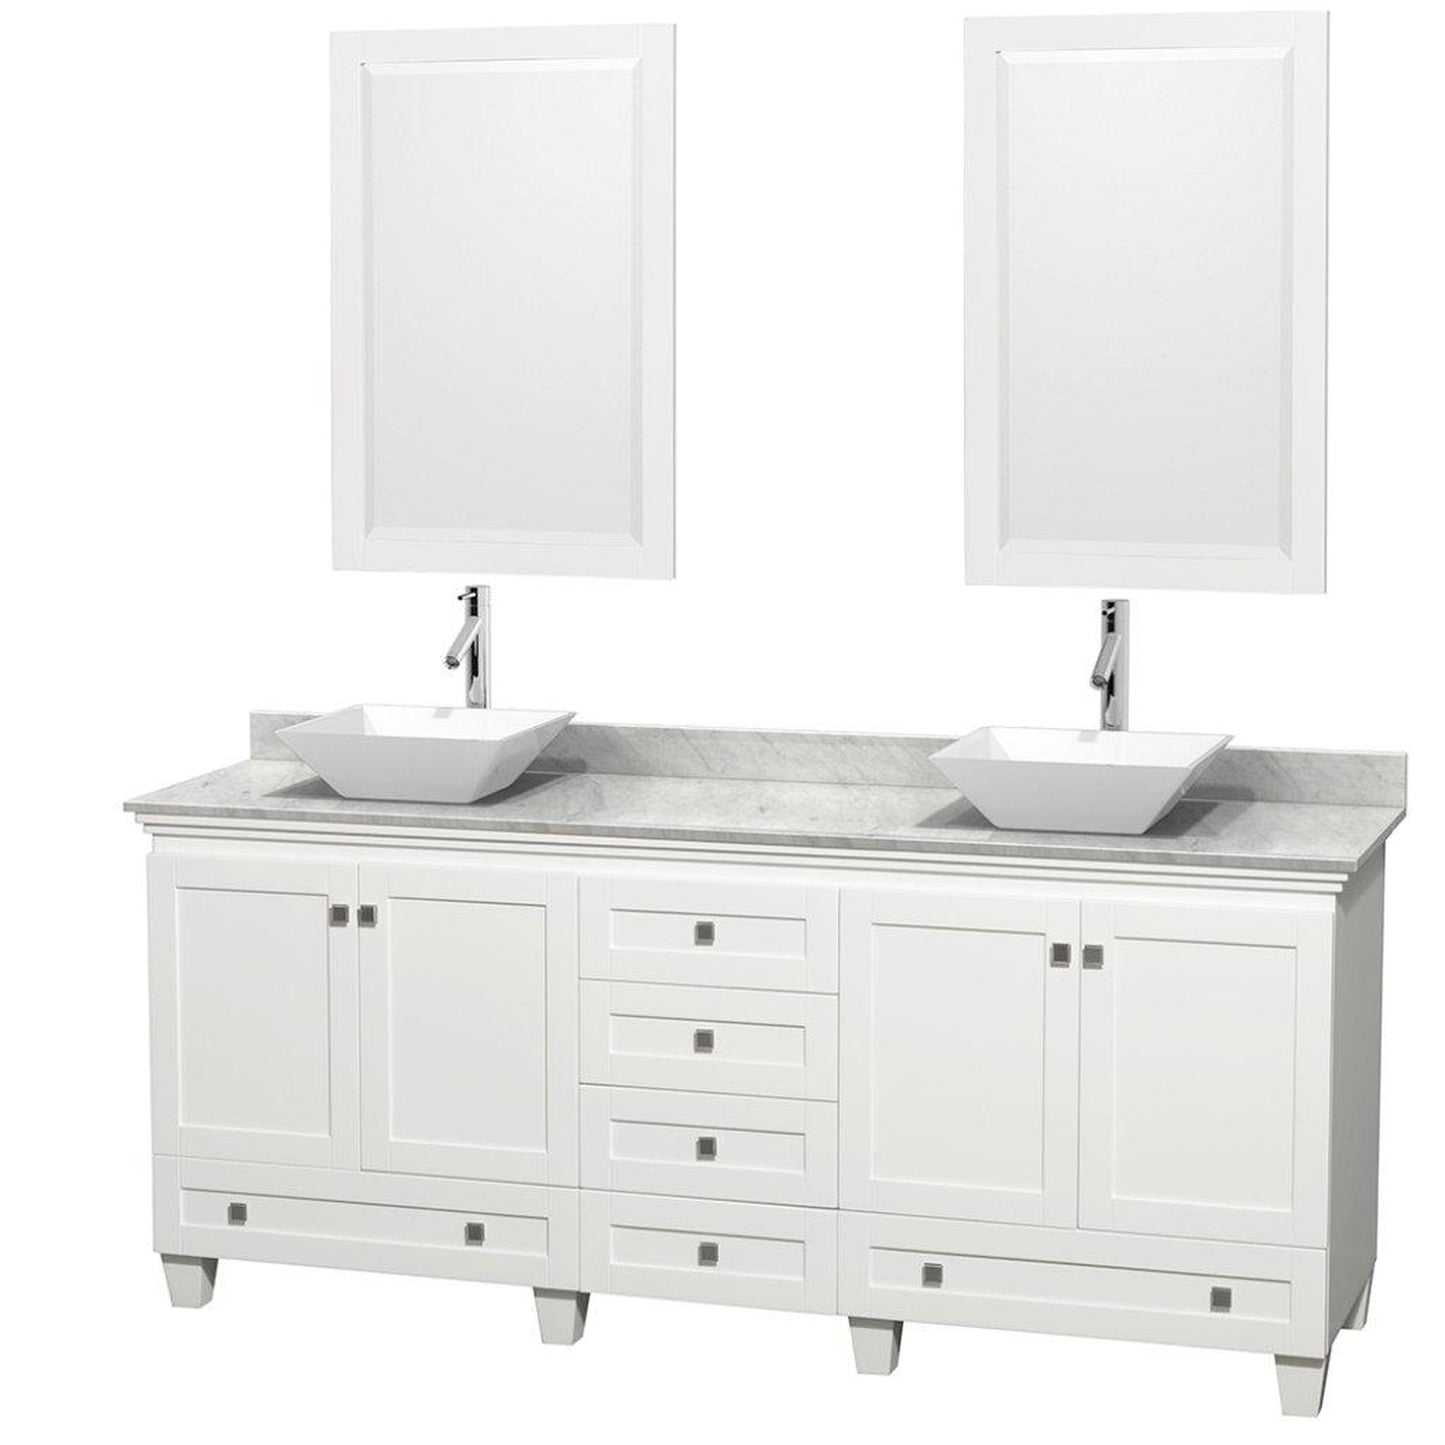 Wyndham Collection Acclaim 80" Double Bathroom White Vanity With White Carrara Marble Countertop And Pyra White Porcelain Sinks And 2 Set Of 24" Mirror